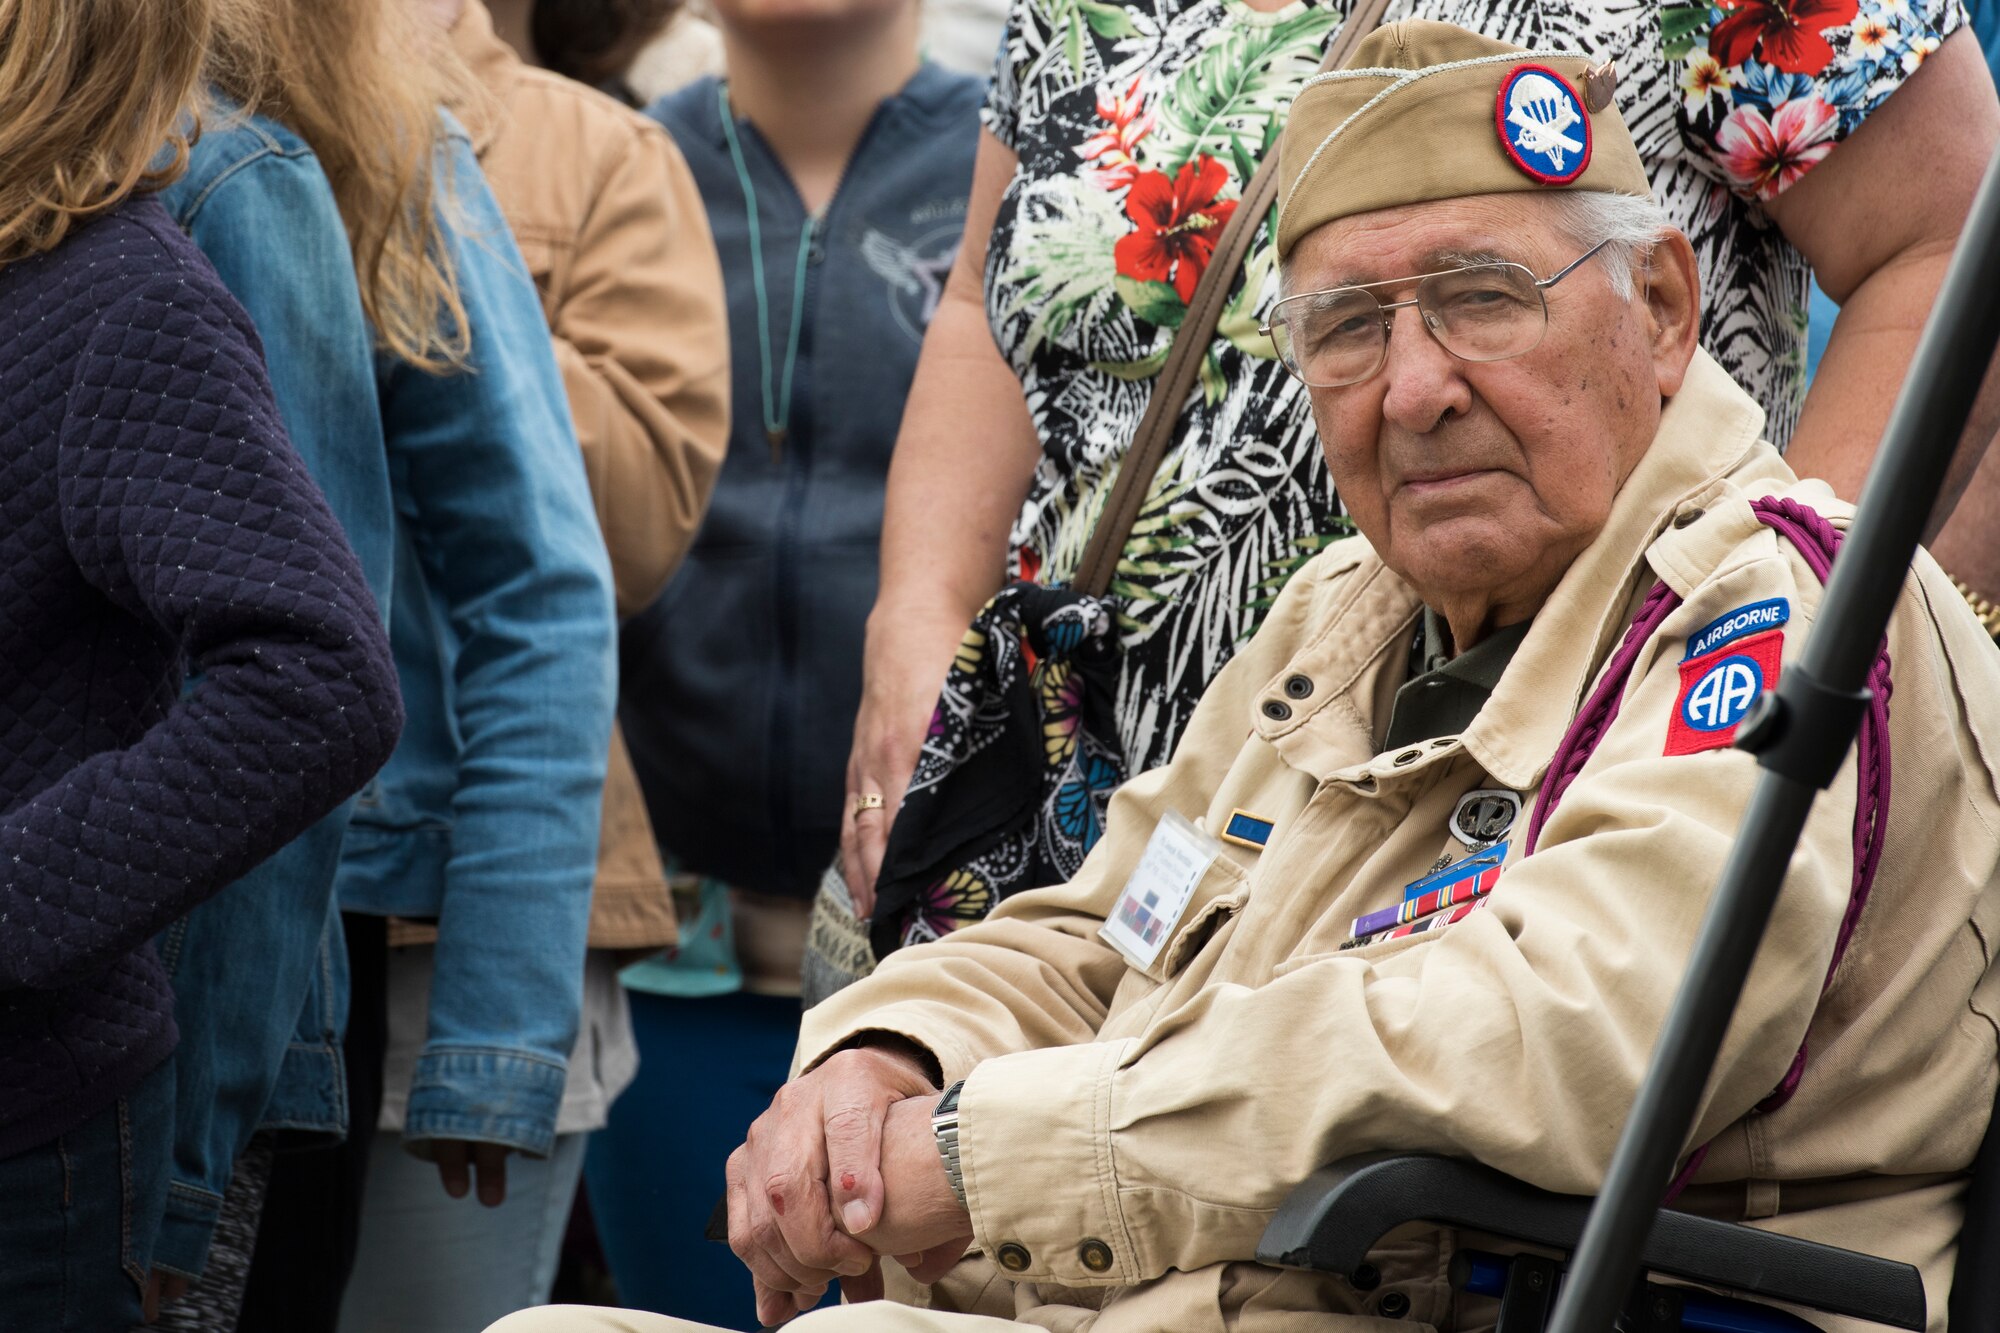 Retired U.S. Army Private First Class Joseph Morettini, 82nd Airborne, 508th Regiment, Easy Company, poses for a photo during a ceremony held in honor of all airborne troops and flight crew that served on D-Day in Picauville, France, June 4, 2019. On June 6, 1944, Morettini dropped from midnight skies into Normandy with the objective to overtake an enemy stronghold near Picauville. During the ceremony’s conclusion, Morettini remarked to each active U.S. airborne infantrymen he shook hands with: “I dropped here 75 years ago.” (U.S. Air Force photo by Senior Airman Kristof J. Rixmann)